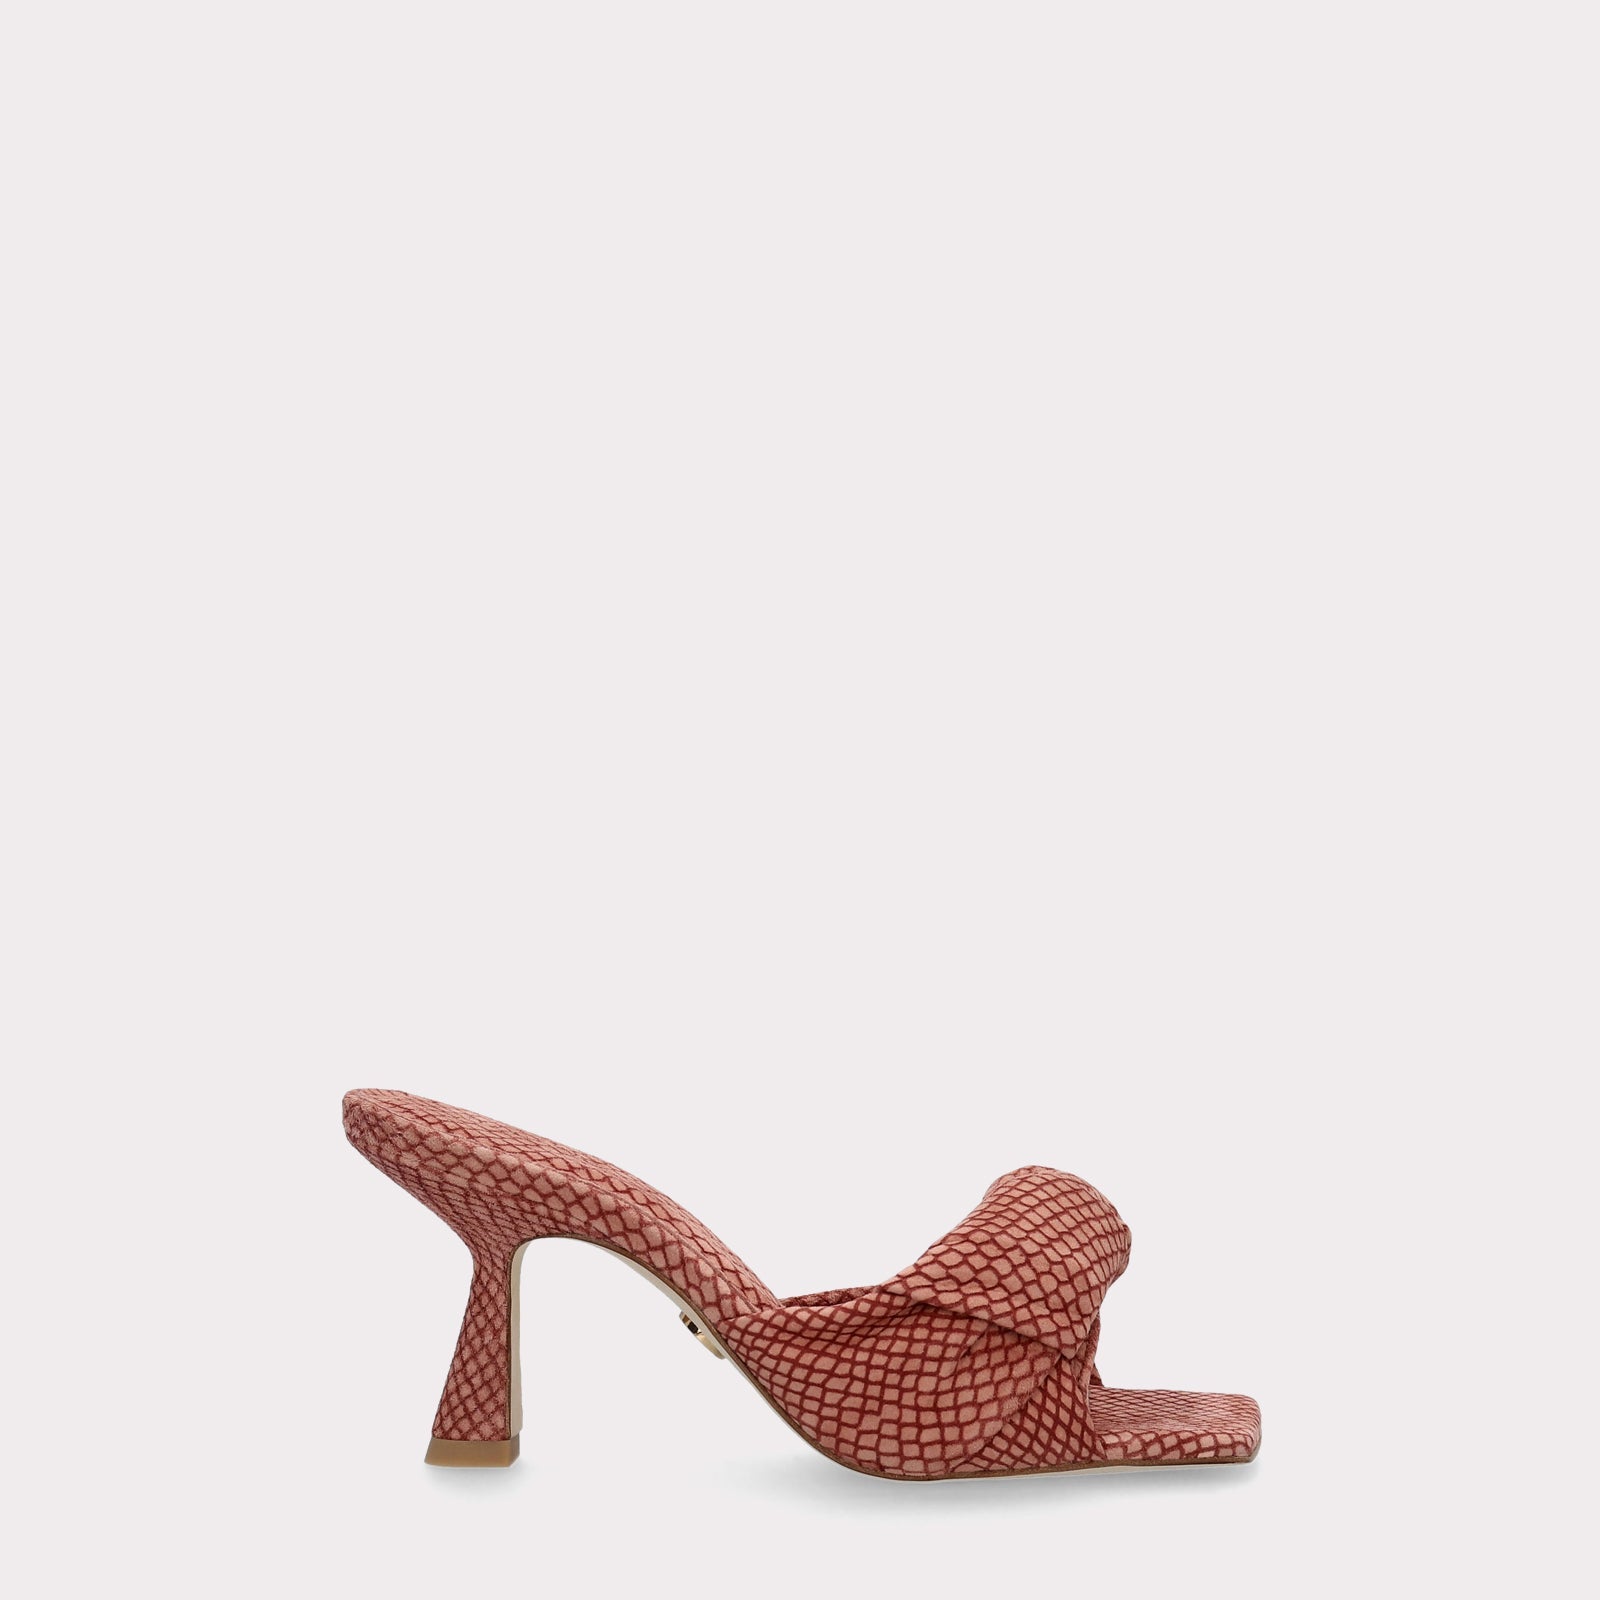 TEXTURED LEATHER MULES NIA BROWN